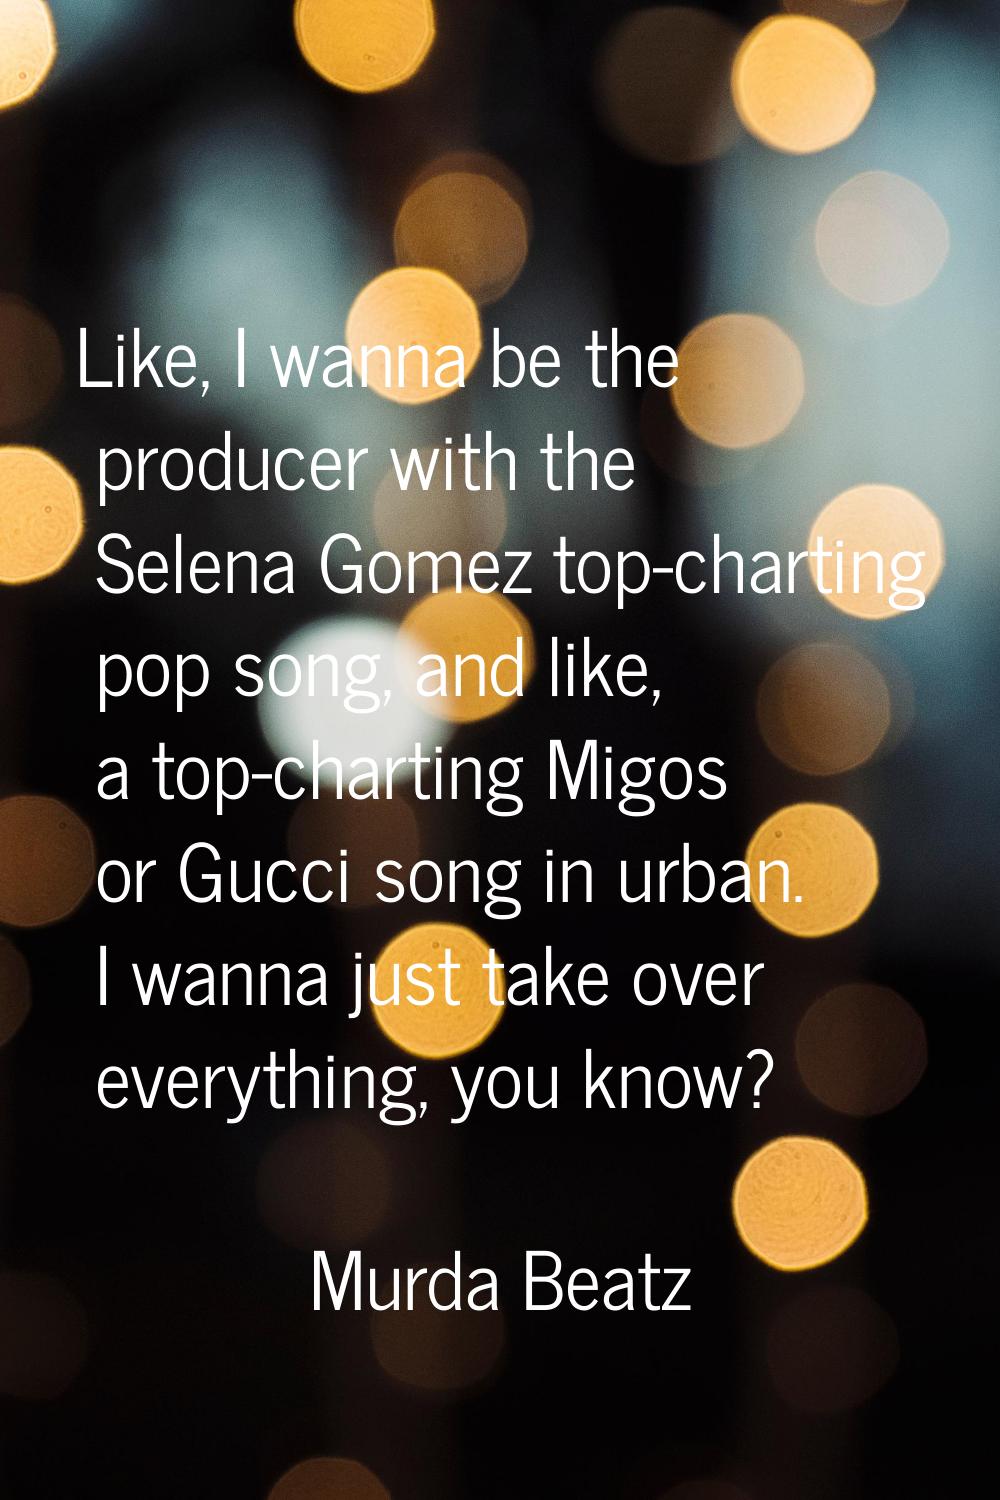 Like, I wanna be the producer with the Selena Gomez top-charting pop song, and like, a top-charting